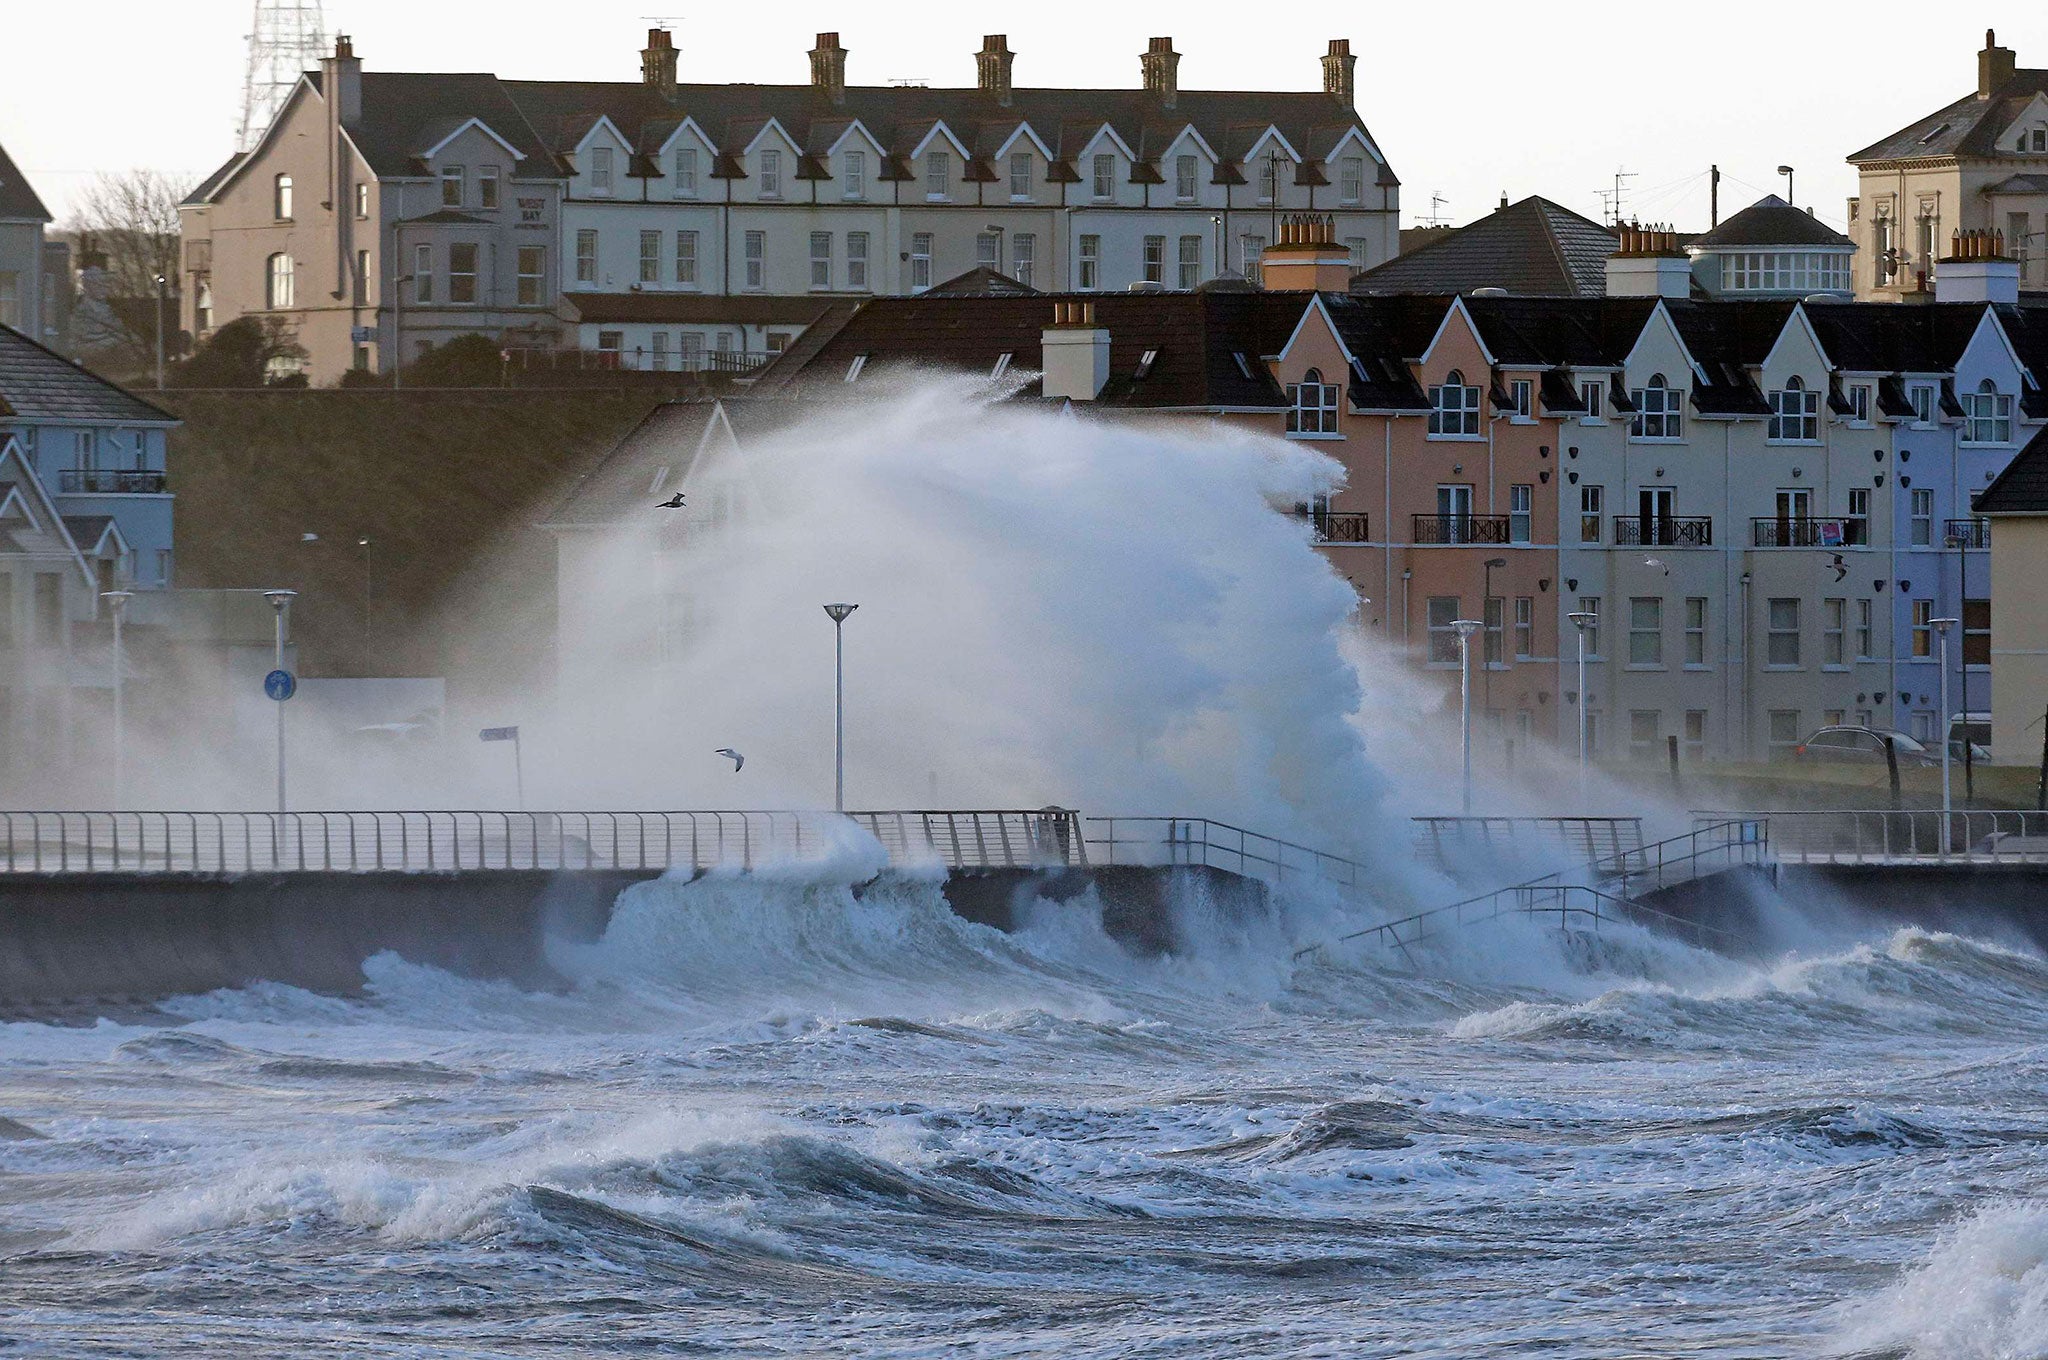 Waves crash against the sea wall in the town of Portrush, as storms hit the United Kingdom 